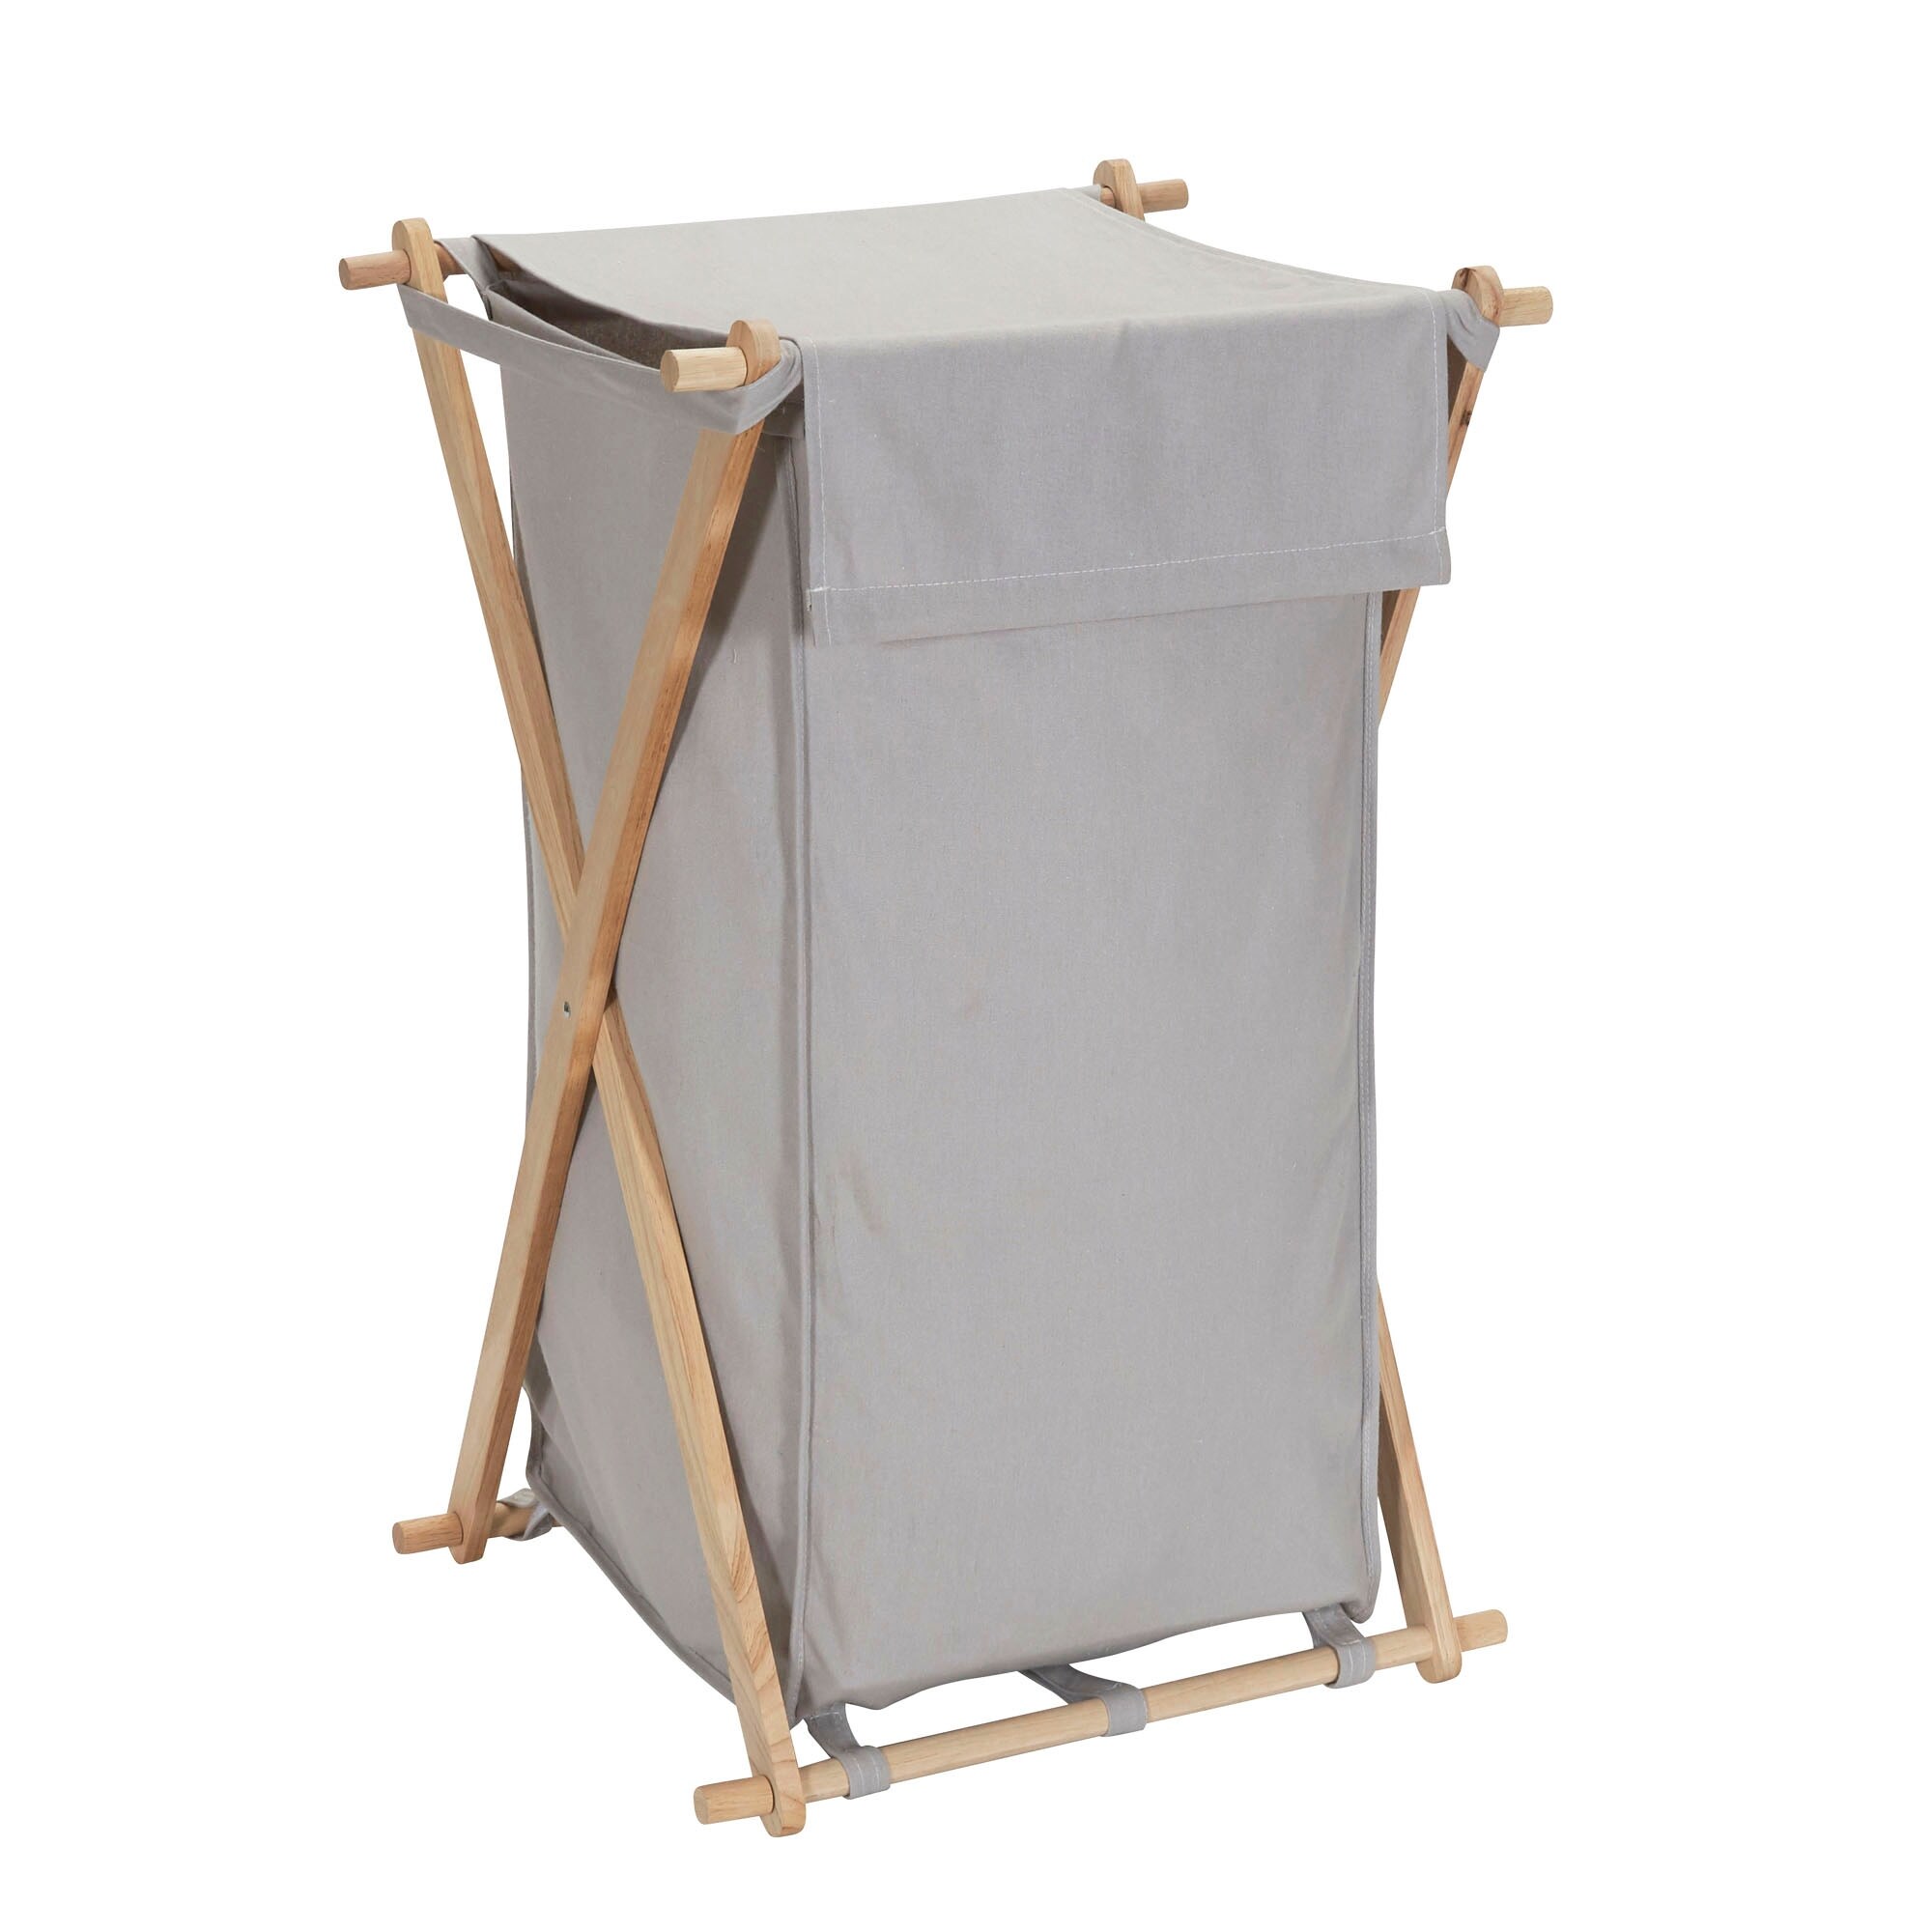 25.6" x 15" Laundry Hamper Extra Large & Tall Collapsible Laundry Basket 